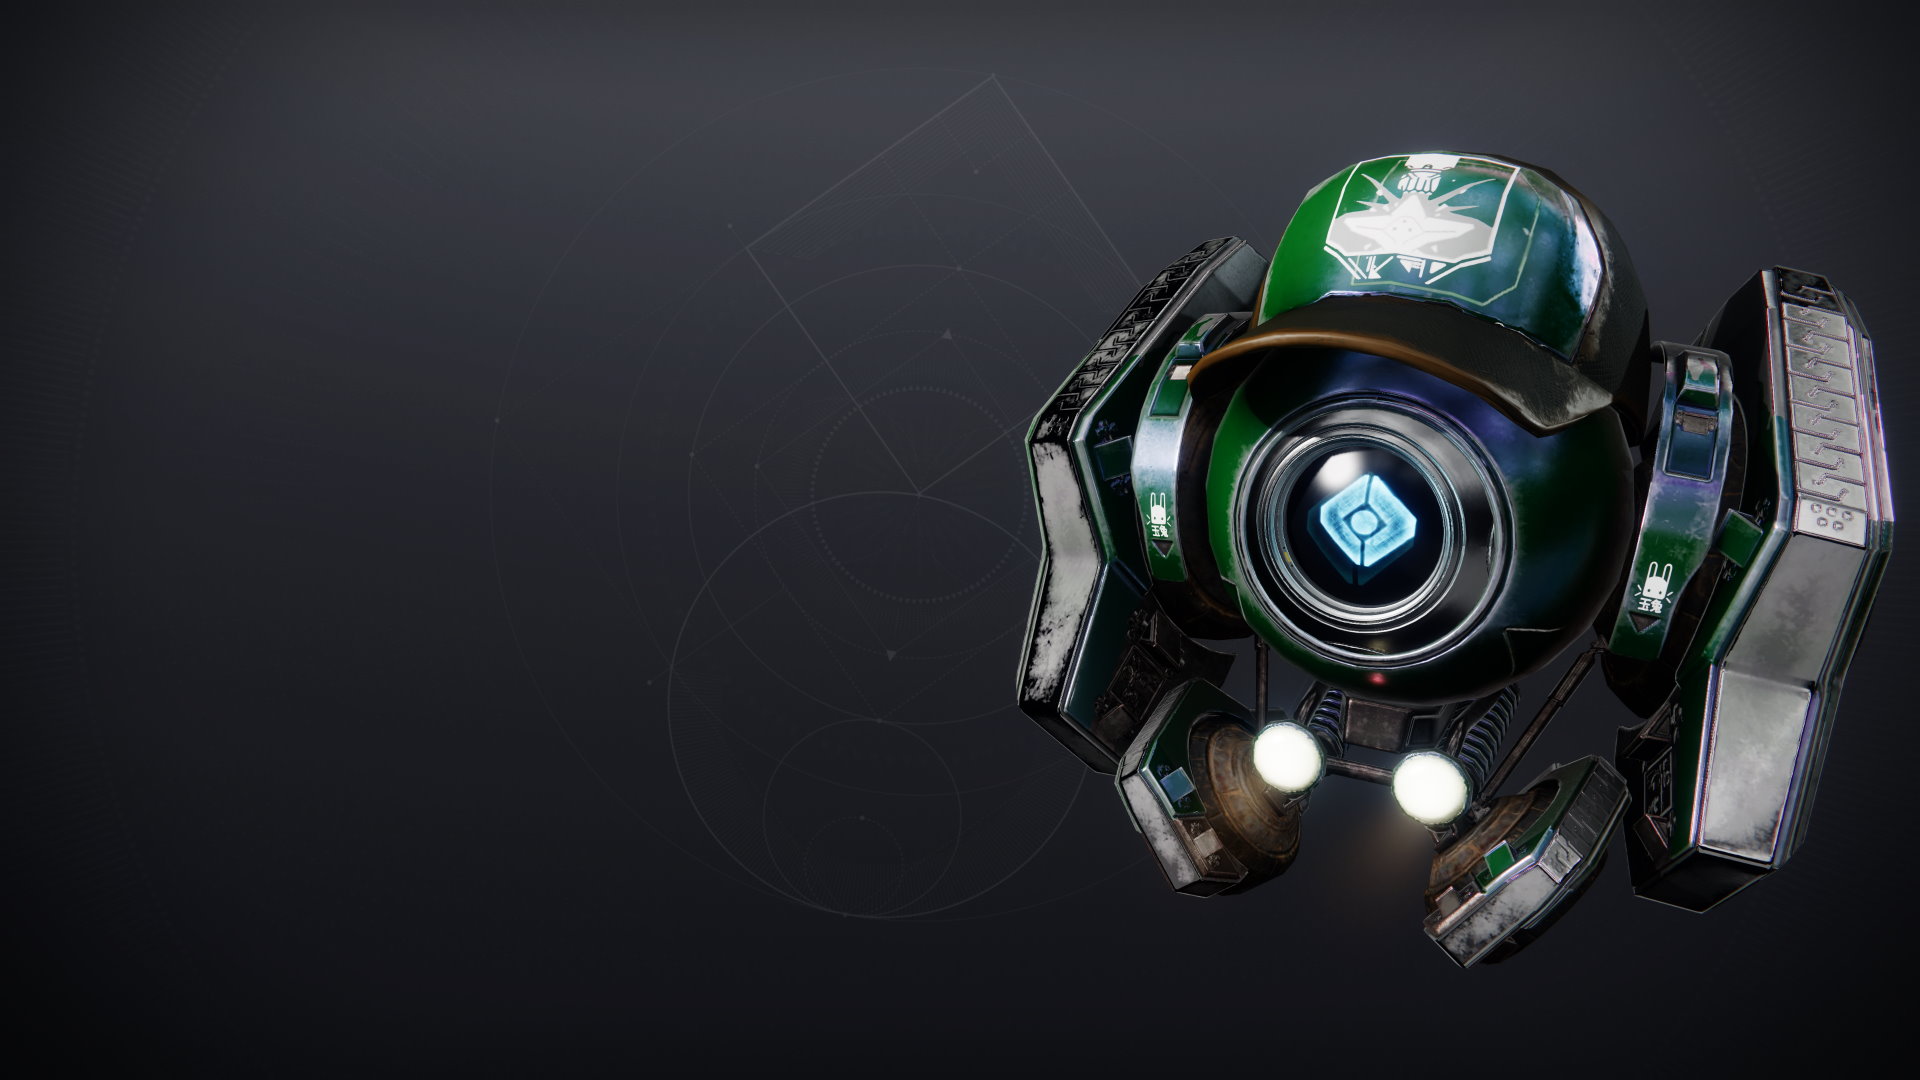 An in-game render of the Monstrous Shell.